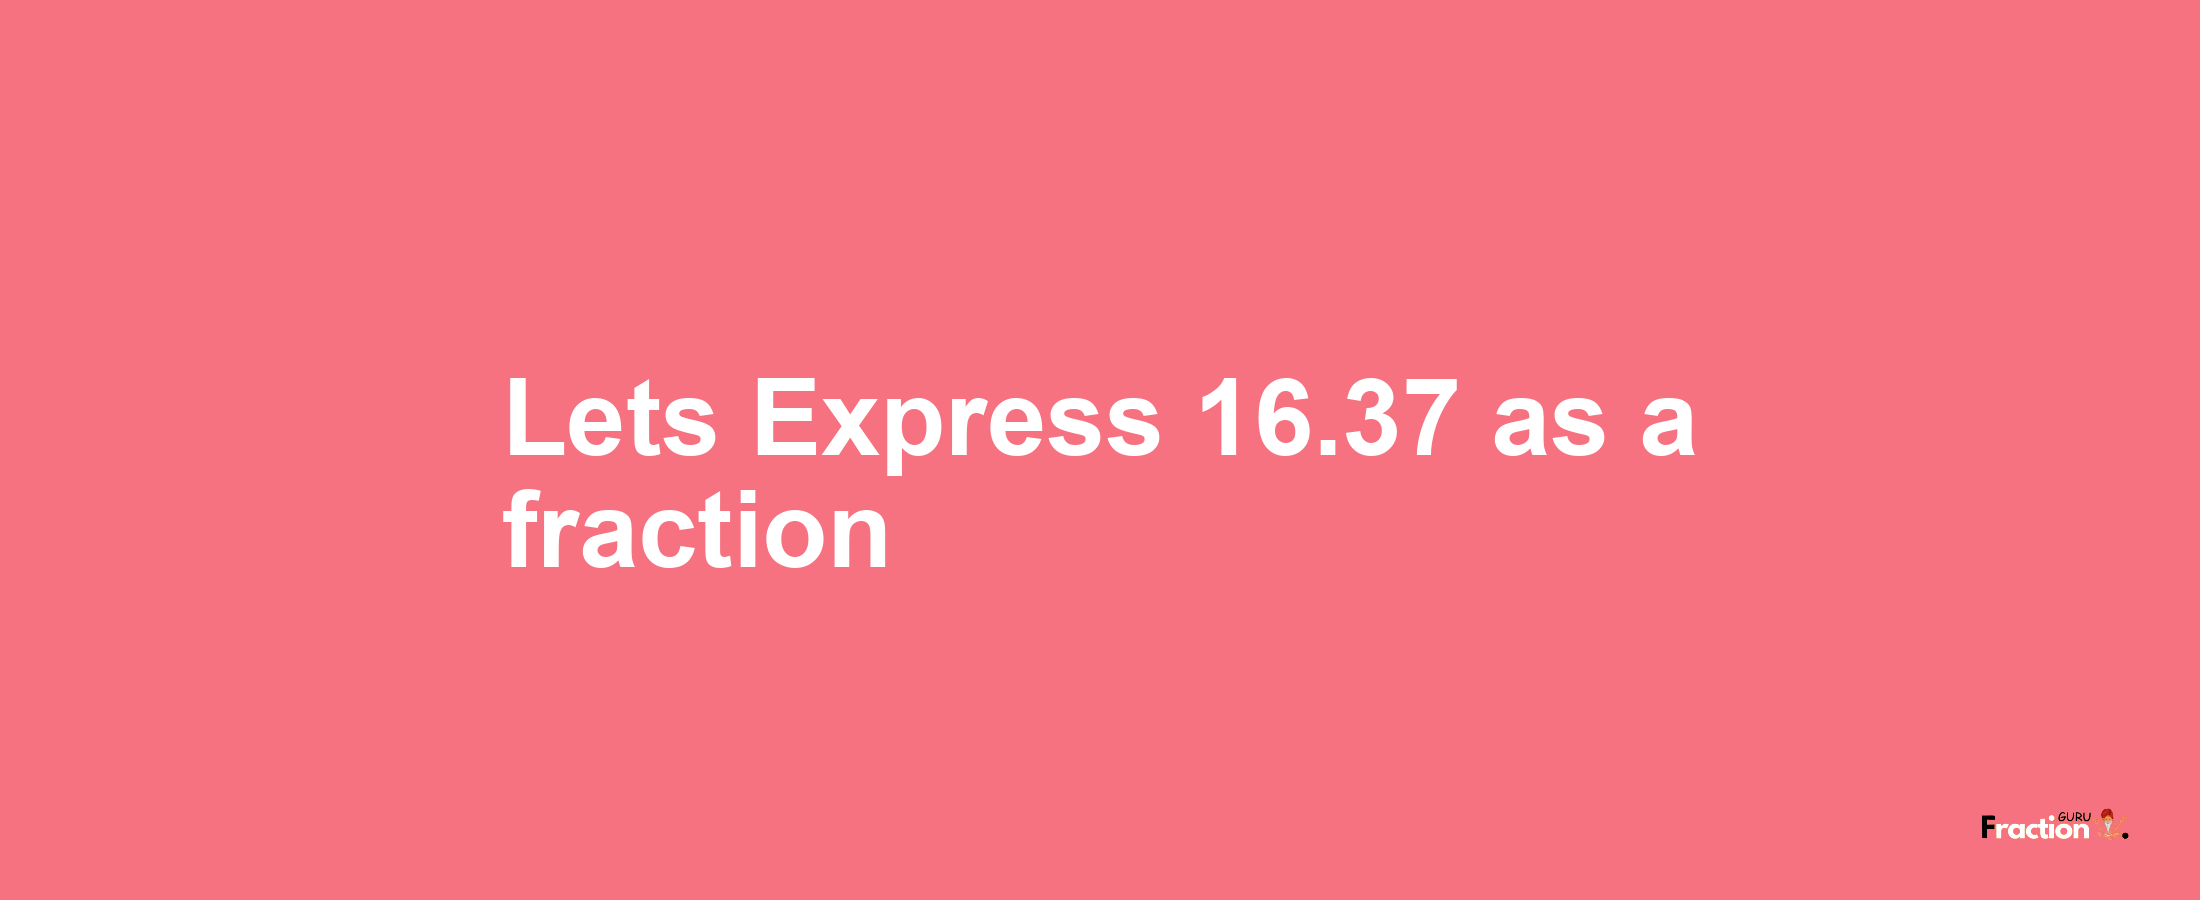 Lets Express 16.37 as afraction